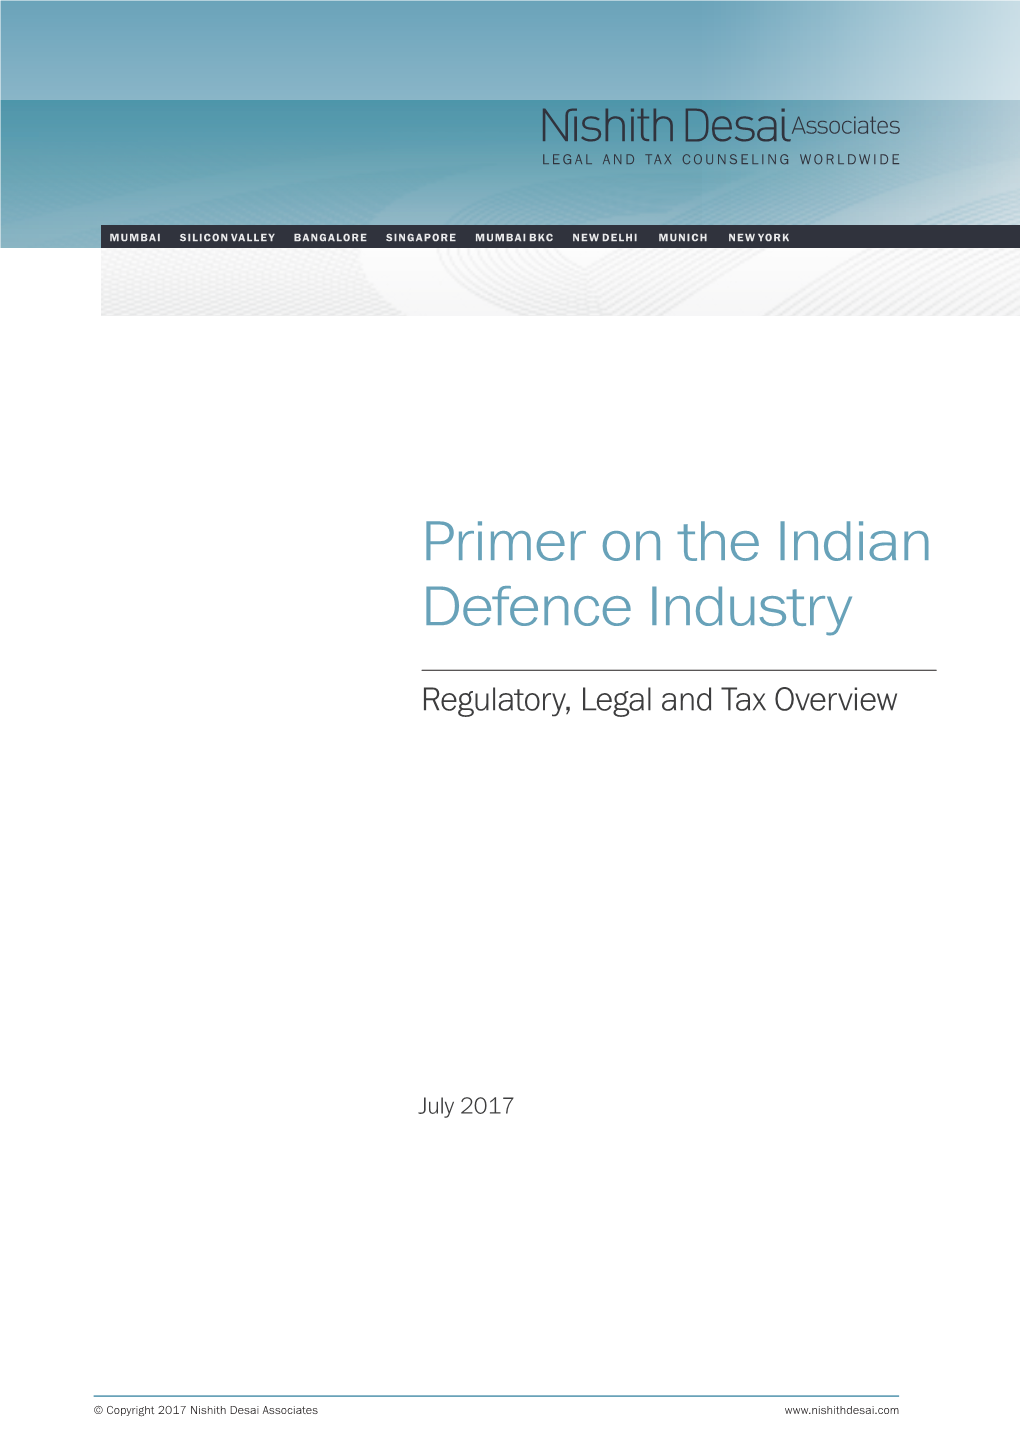 Primer on the Indian Defence Industry